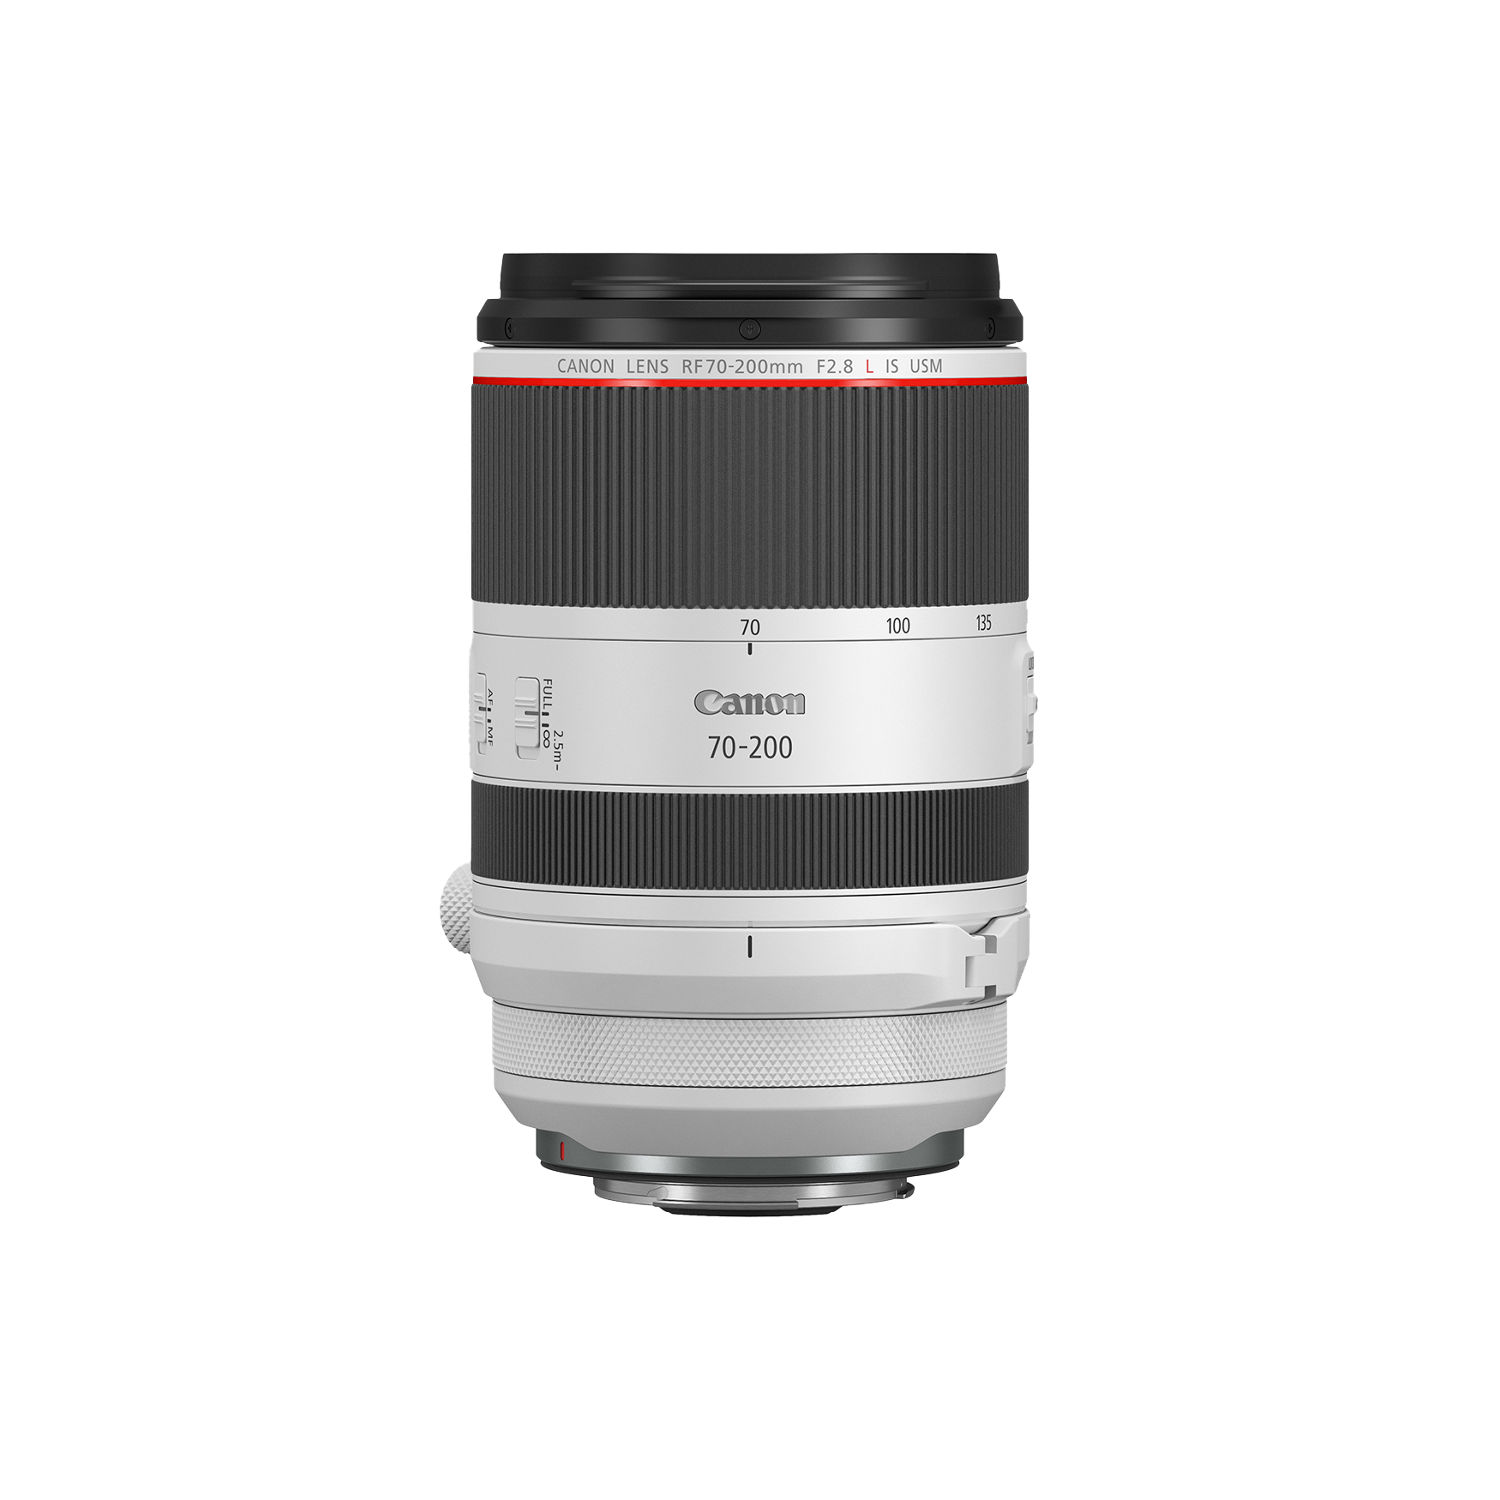 Refurbished RF70-200mm F2.8 L IS USM $1999 from Canon